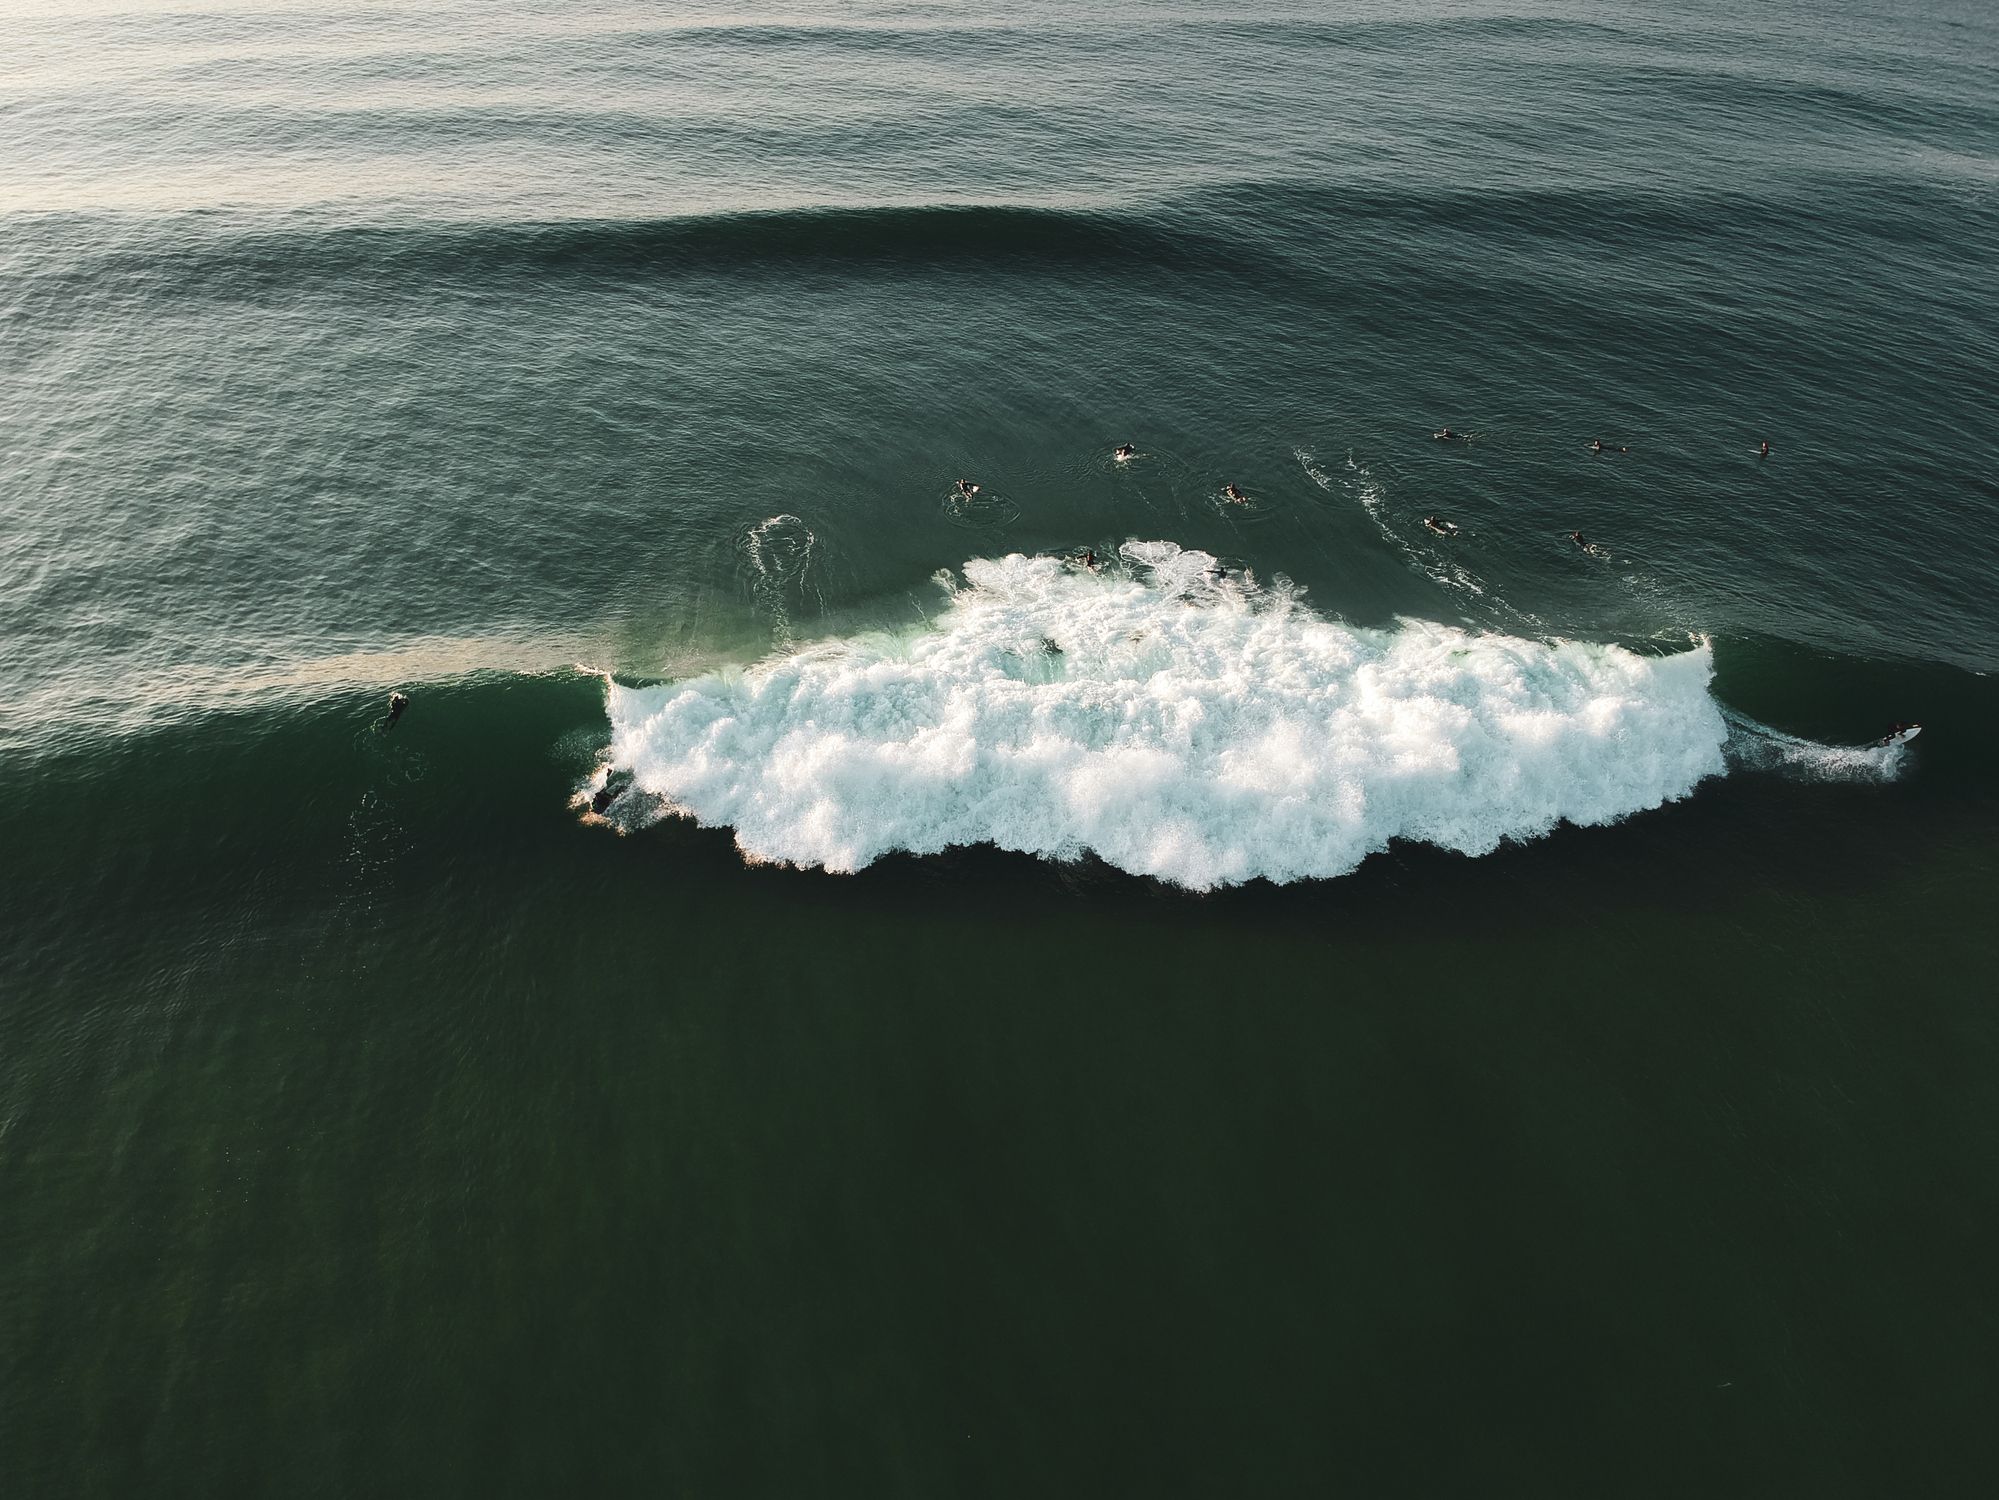 An aerial view of two surfers riding a perfect A-frame wave in Ericeira, Portugal